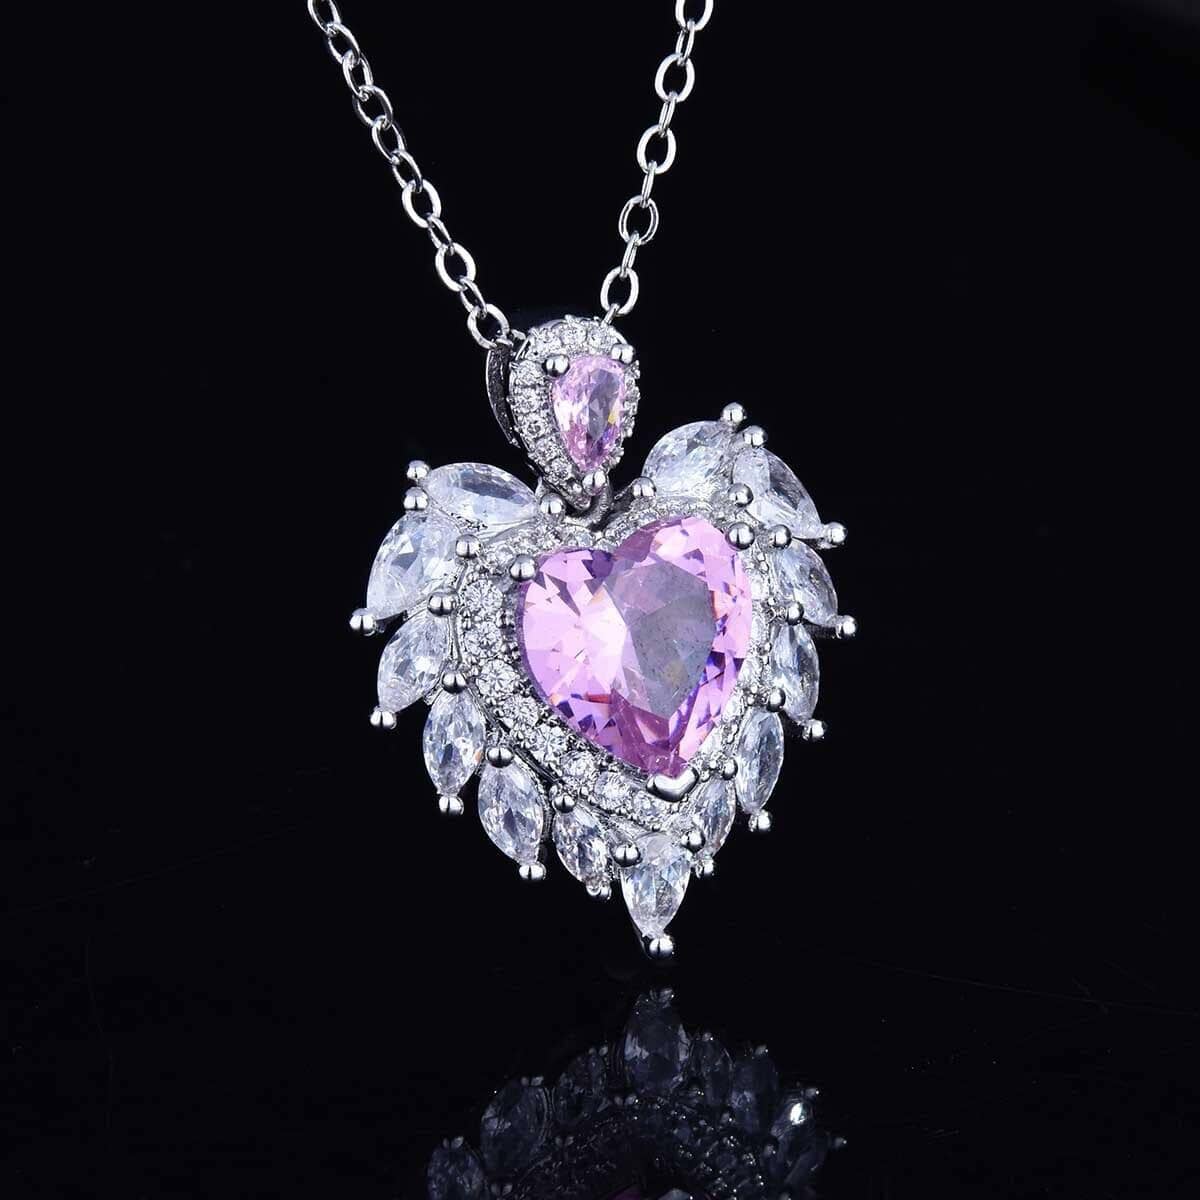 Luxury Temperament Design Angel Wing Simulated Aquamarine/ Amethyst Heart Necklace - 925 Sterling SilverNecklace